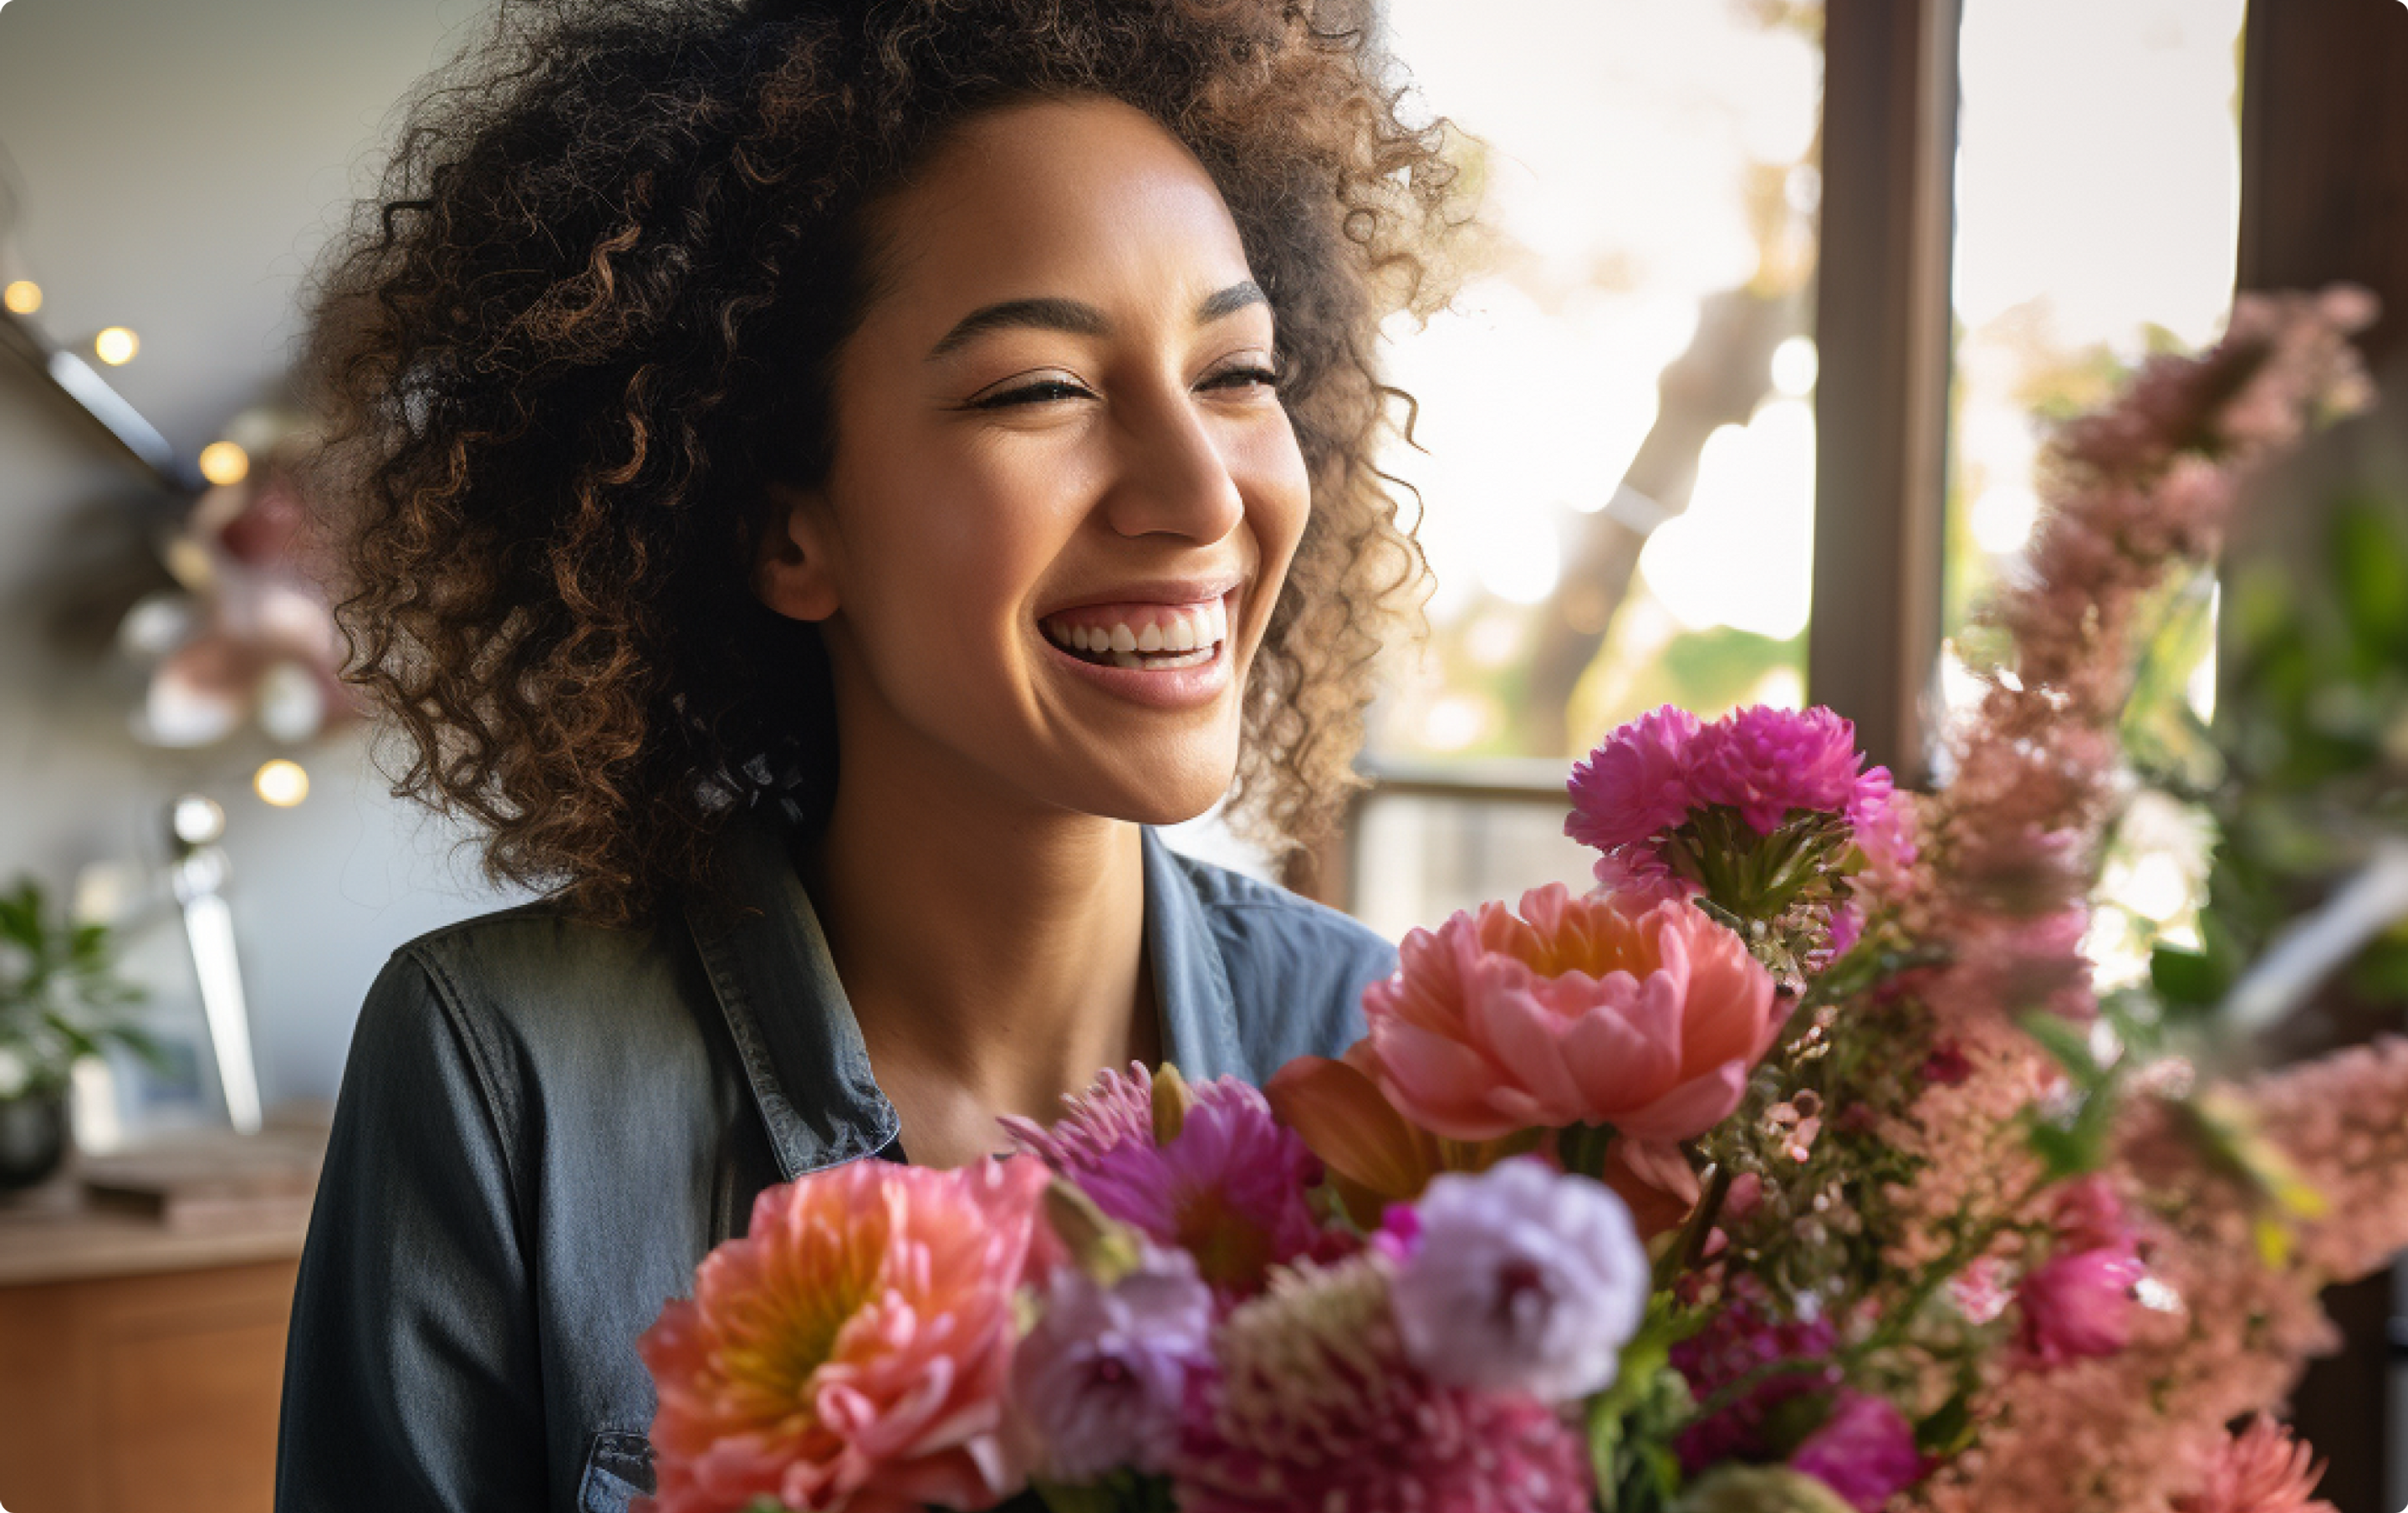 Woman Smiling Getting Flowers - Beautiful Bouquet with pink, coral, and purple flowers.